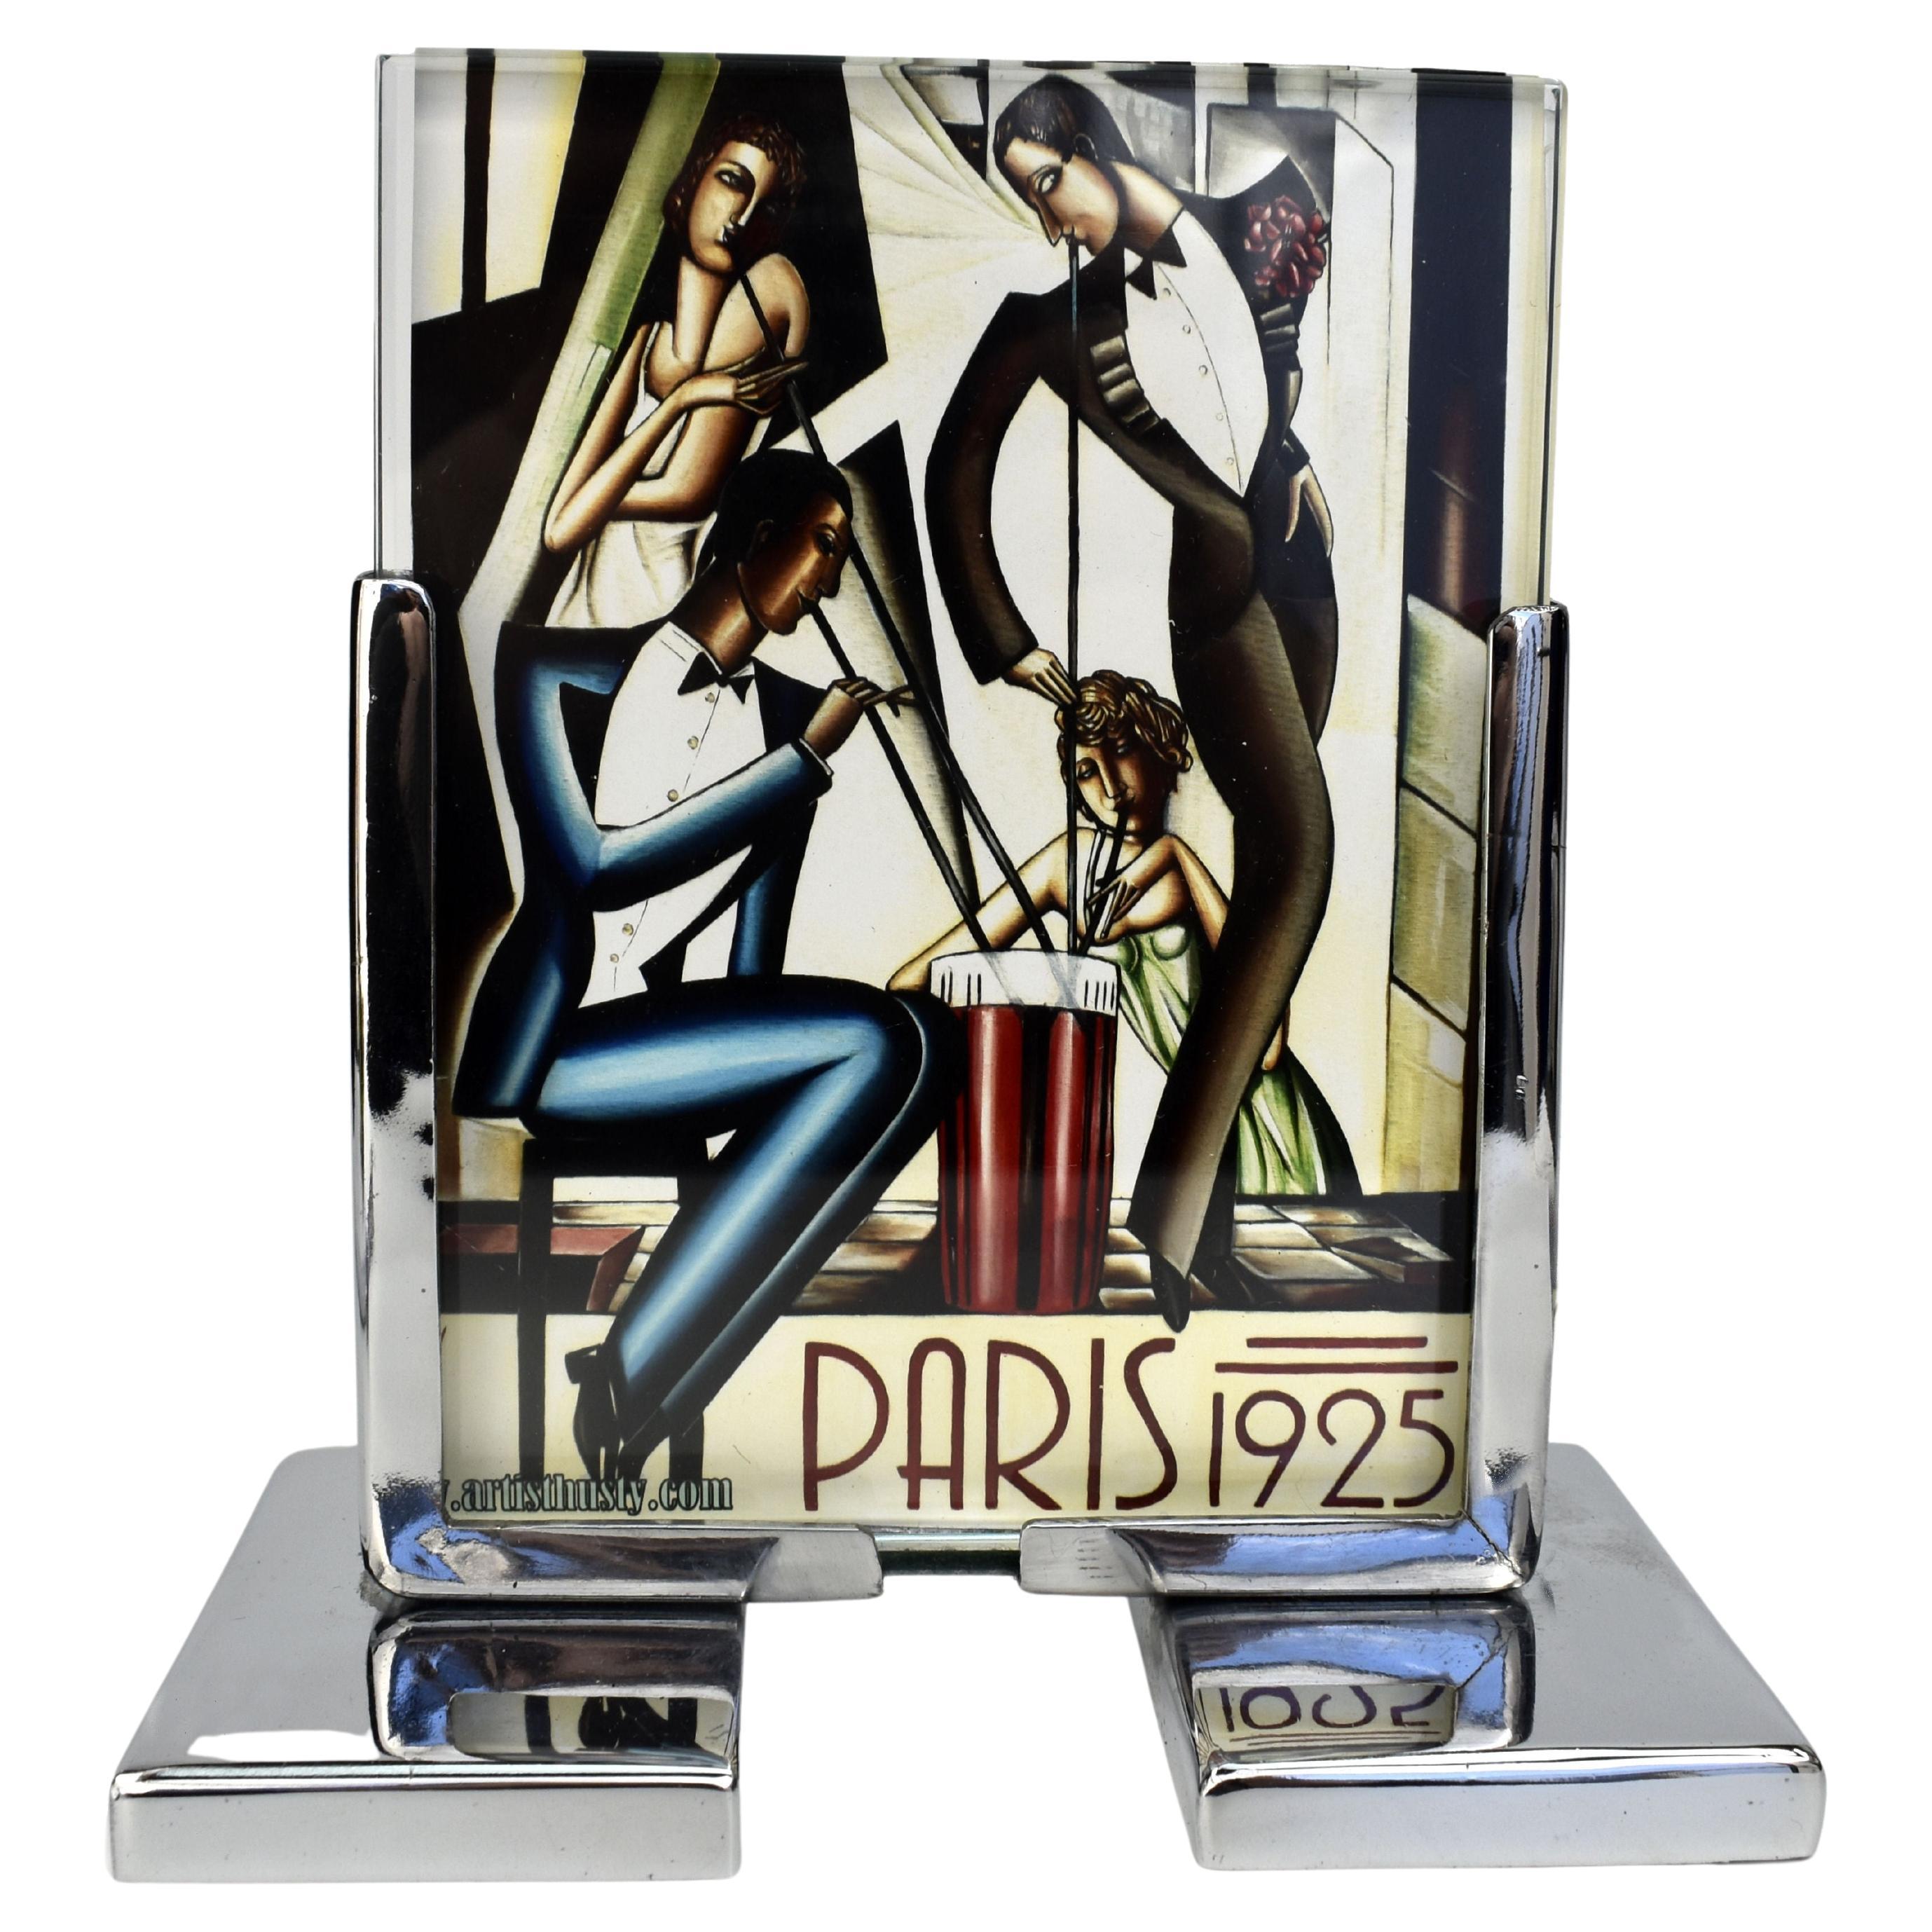 Superb 1930s Art Deco modernist free standing picture frame in chrome and glass. The frame has two pieces of glass which slot into the chrome stand. You can display a picture both to the front and back. Very good vintage condition, with no